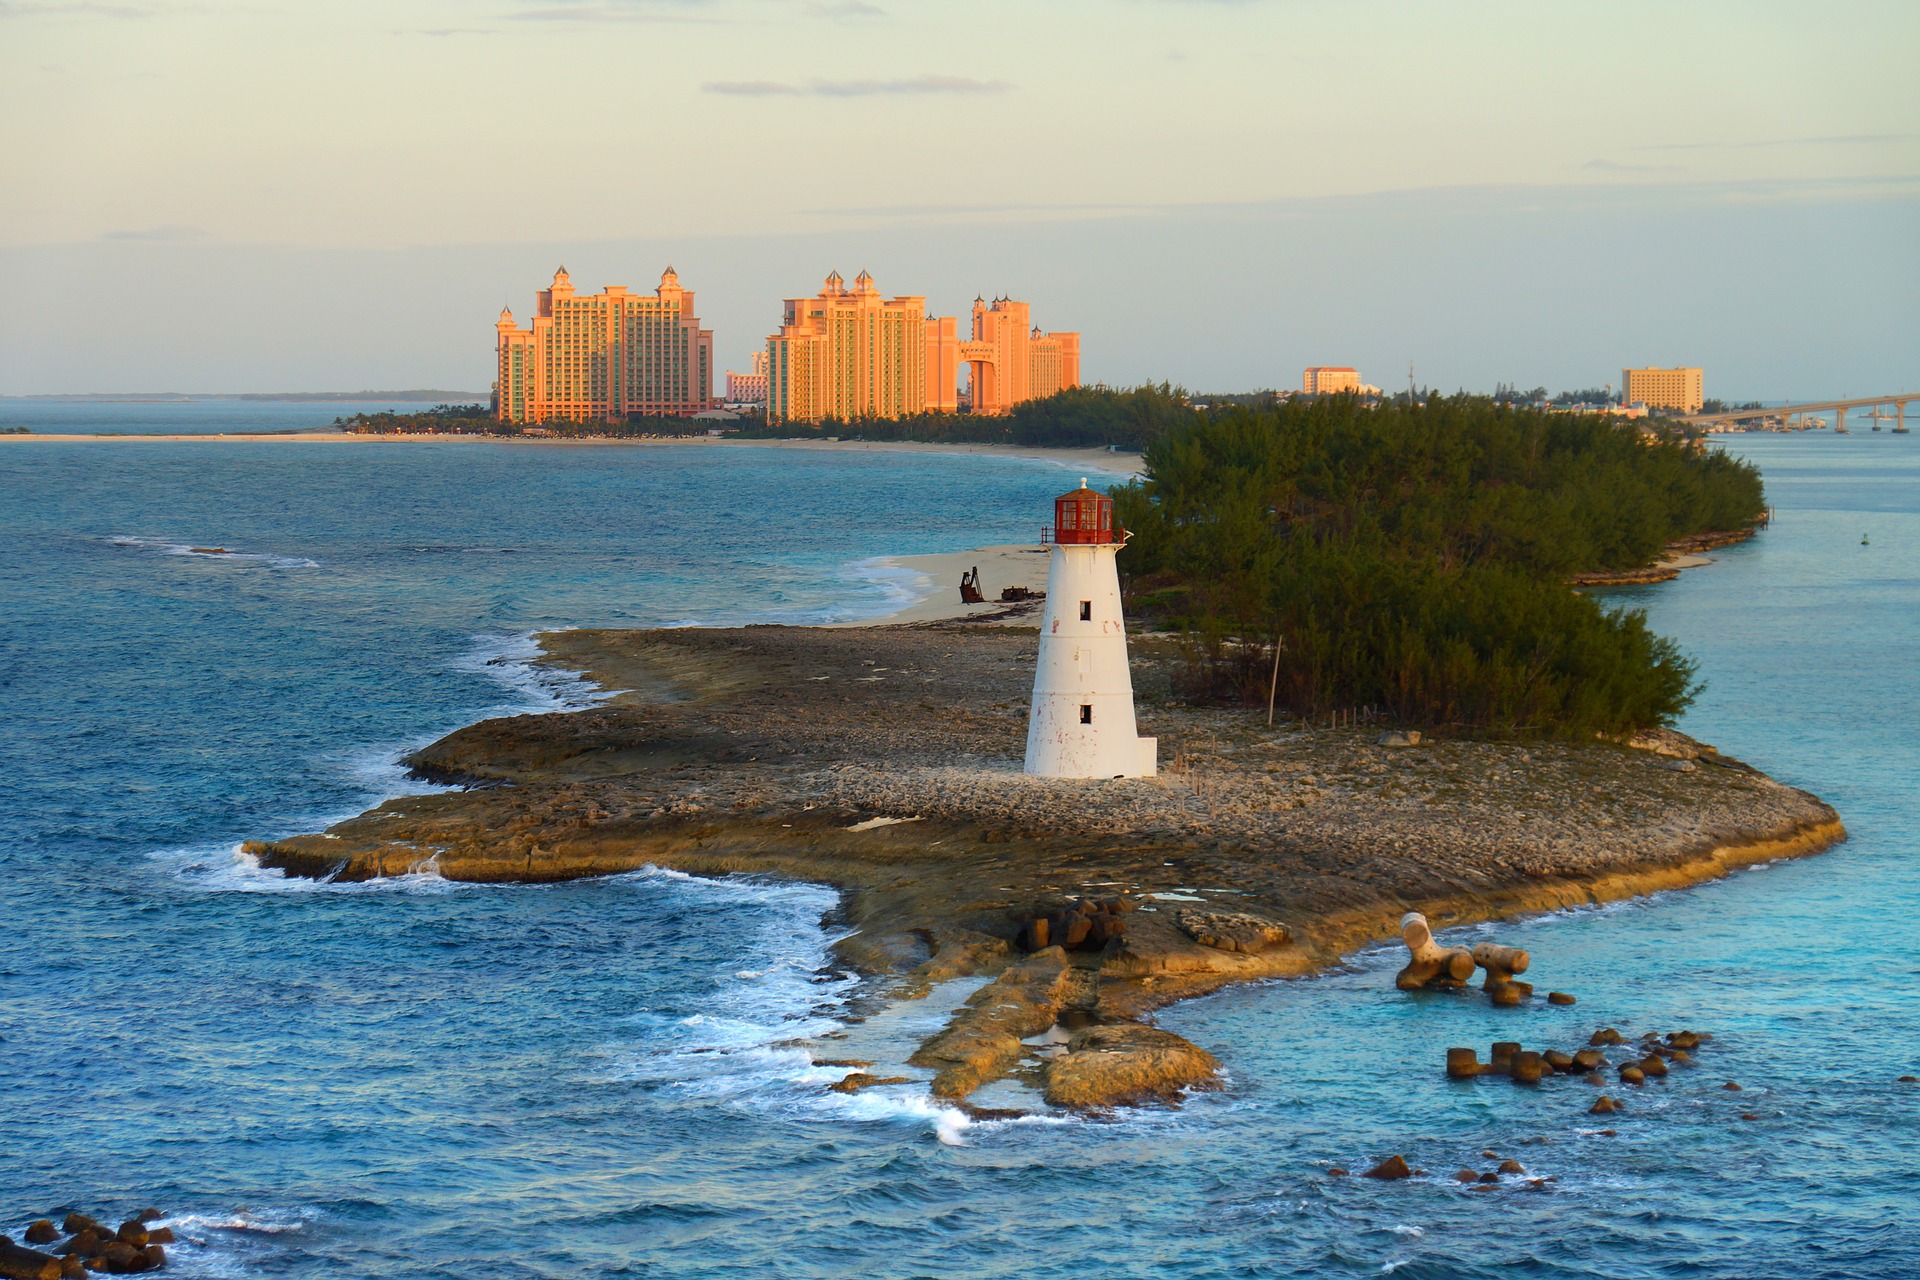 Lighthouse with Atlantis in the background taken in the Bahamas